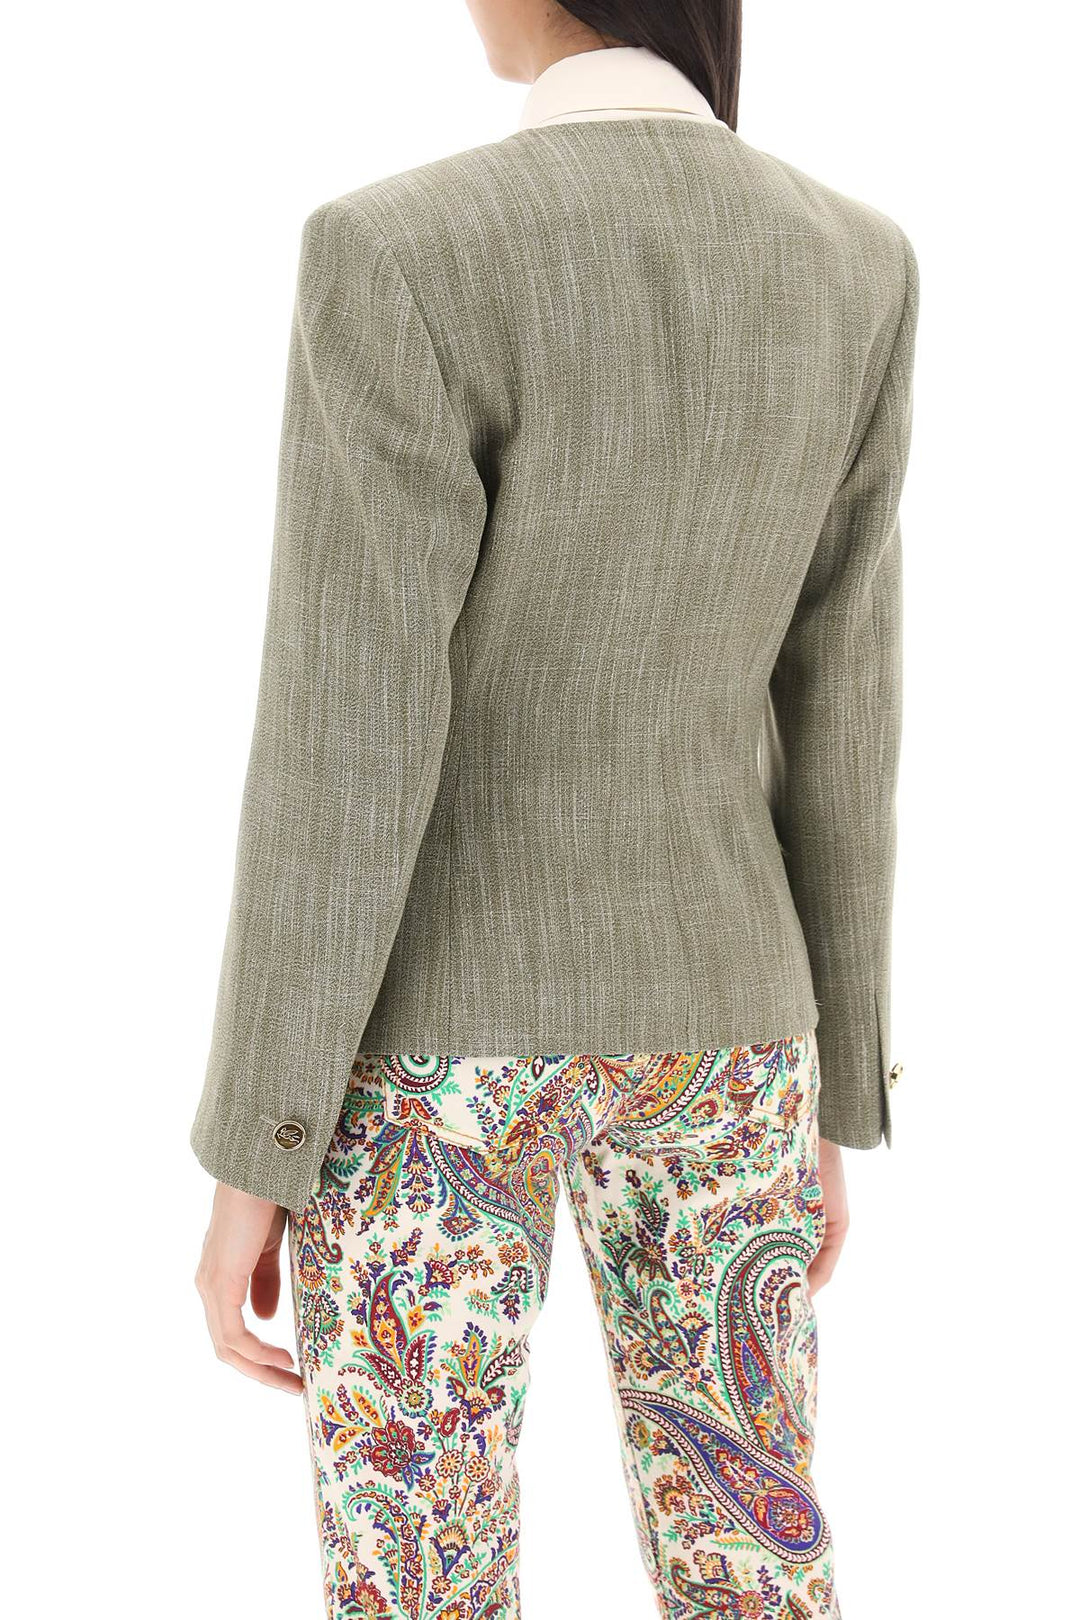 Etro Fitted Jacket With Padded Shoulders   Verde